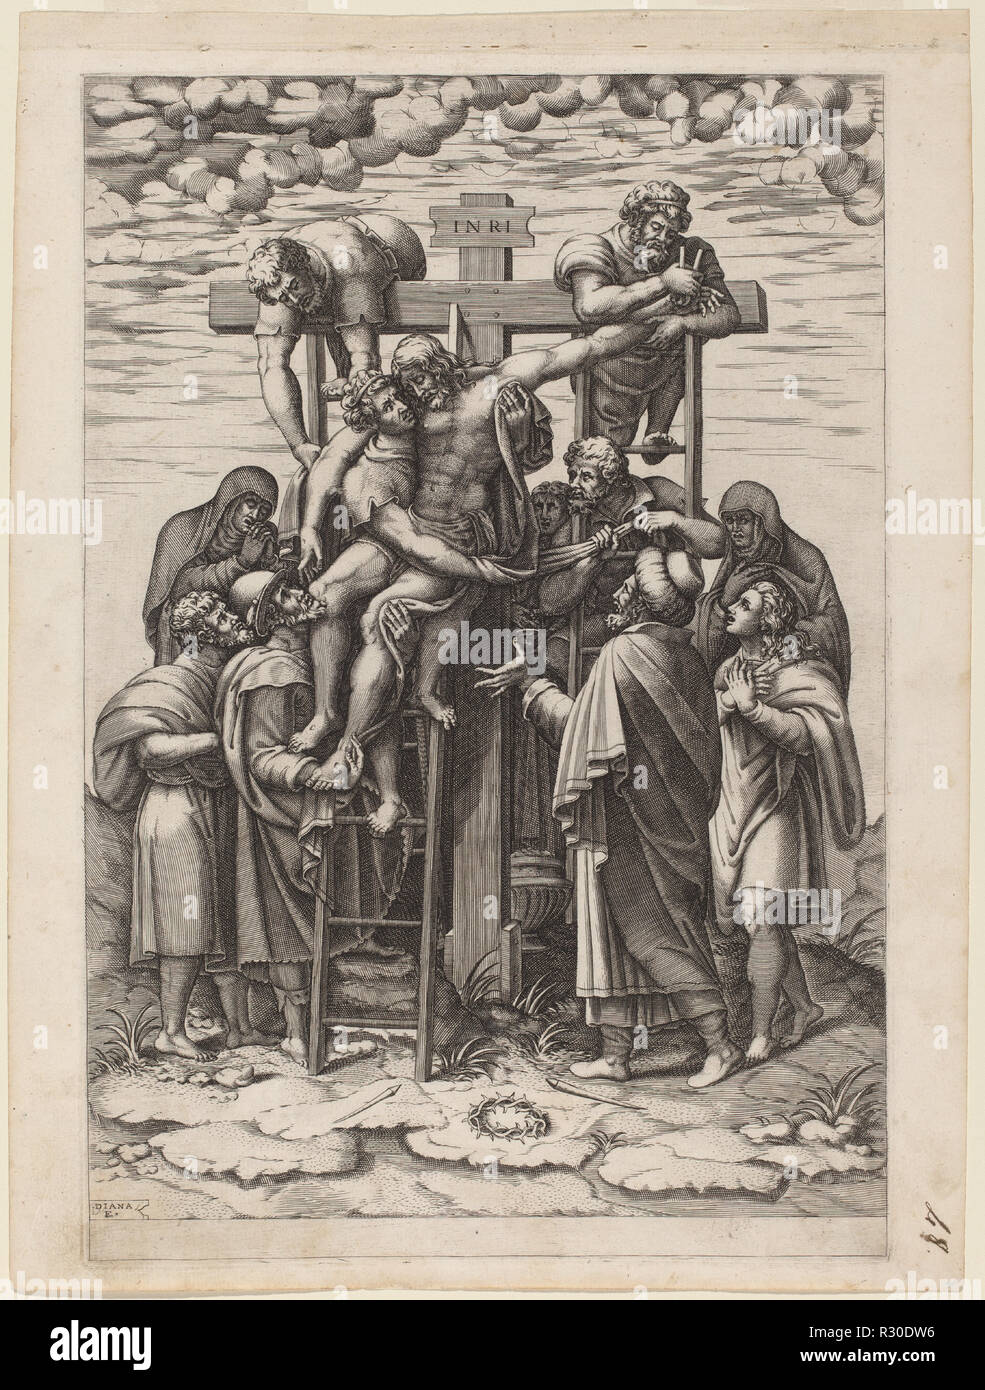 The Descent from the Cross. Dated: 1570. Dimensions: plate: 32.6 x 22.1 cm (12 13/16 x 8 11/16 in.)  sheet: 35 x 26.2 cm (13 3/4 x 10 5/16 in.). Medium: engraving on laid paper. Museum: National Gallery of Art, Washington DC. Author: Diana Scultori. Stock Photo